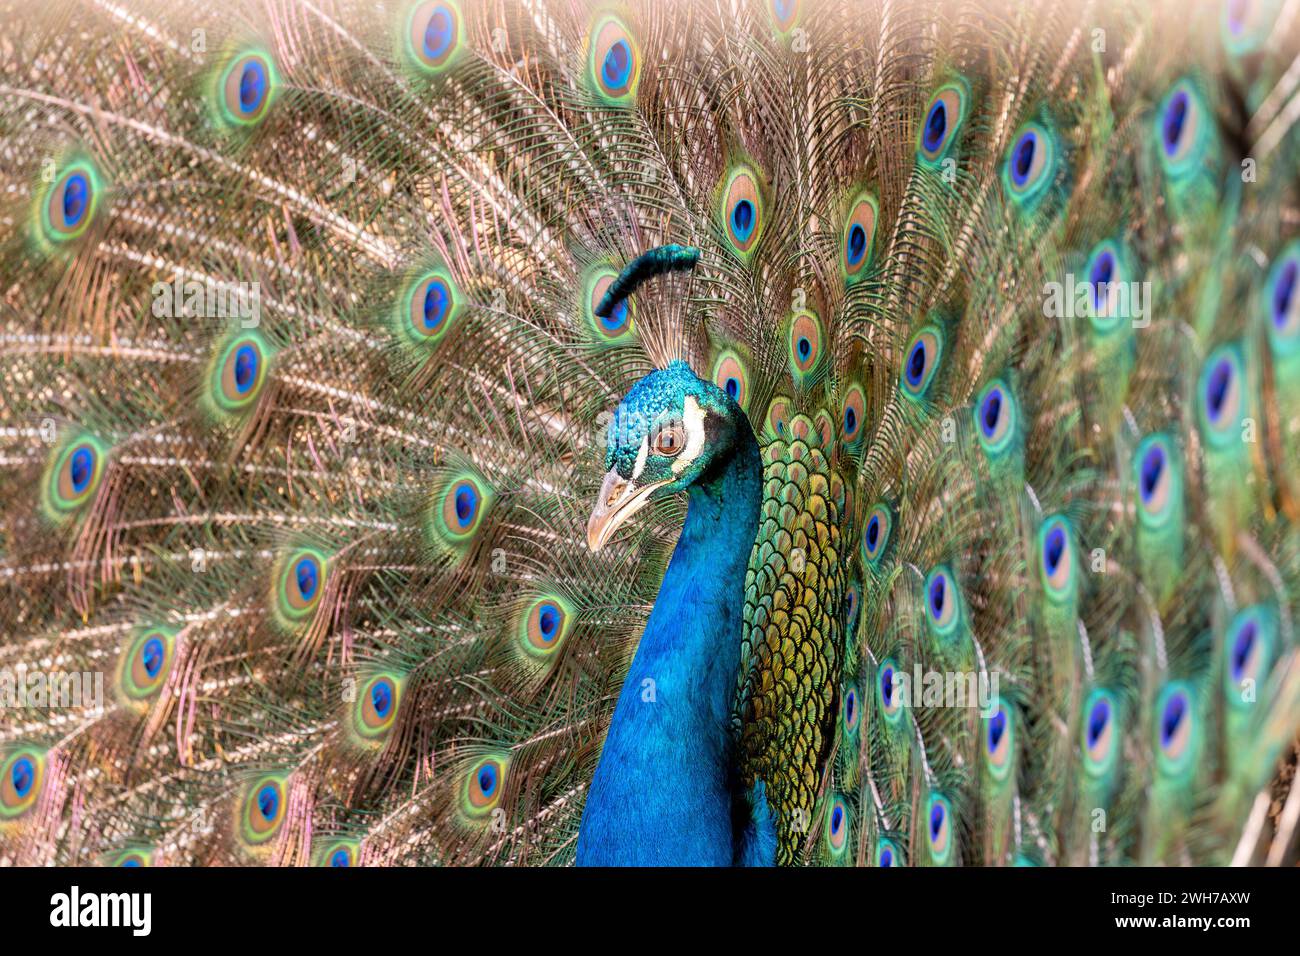 The Common Peafowl (Pavo cristatus), commonly known as the Peacock, found in Delhi, India, is famed for its extravagant plumage and majestic tail disp Stock Photo